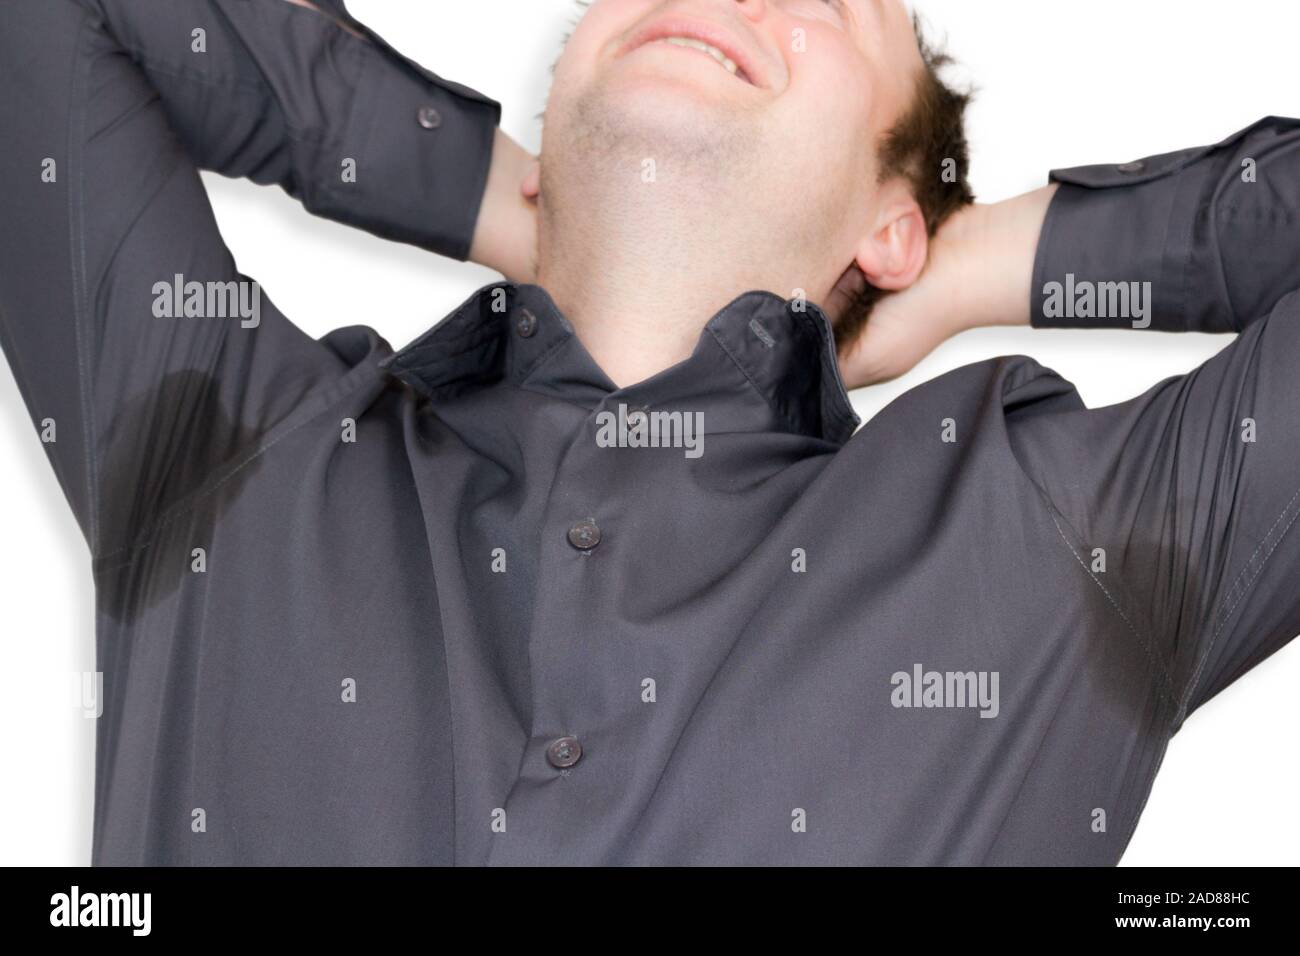 sweat stains Stock Photo